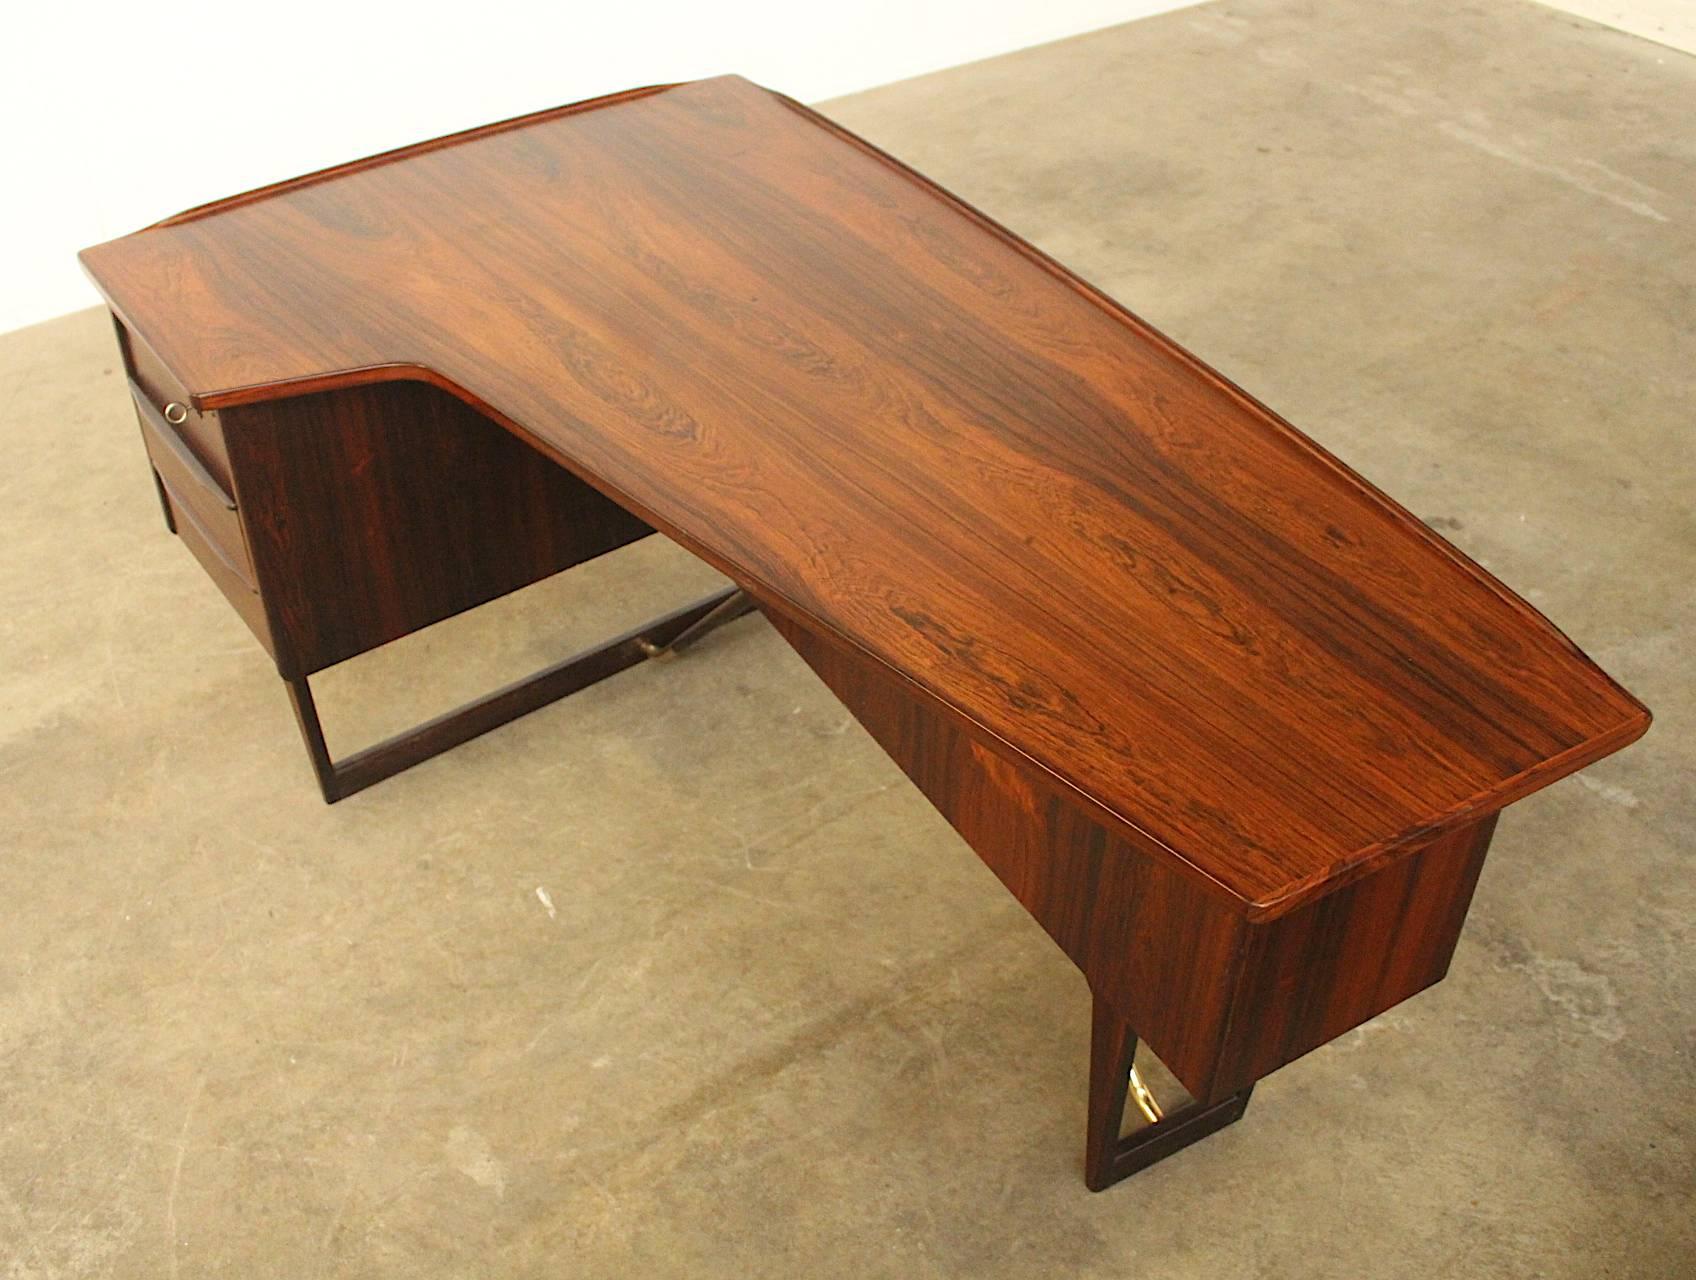 For all items from this dealer please hit the button VIEW ALL FROM SELLER below on this page

Beautifully shaped rosewood corner desk by Peter Lovig. The desk has three drawers of which the top drawer is fitted with a lock, a wide bookshelf in the